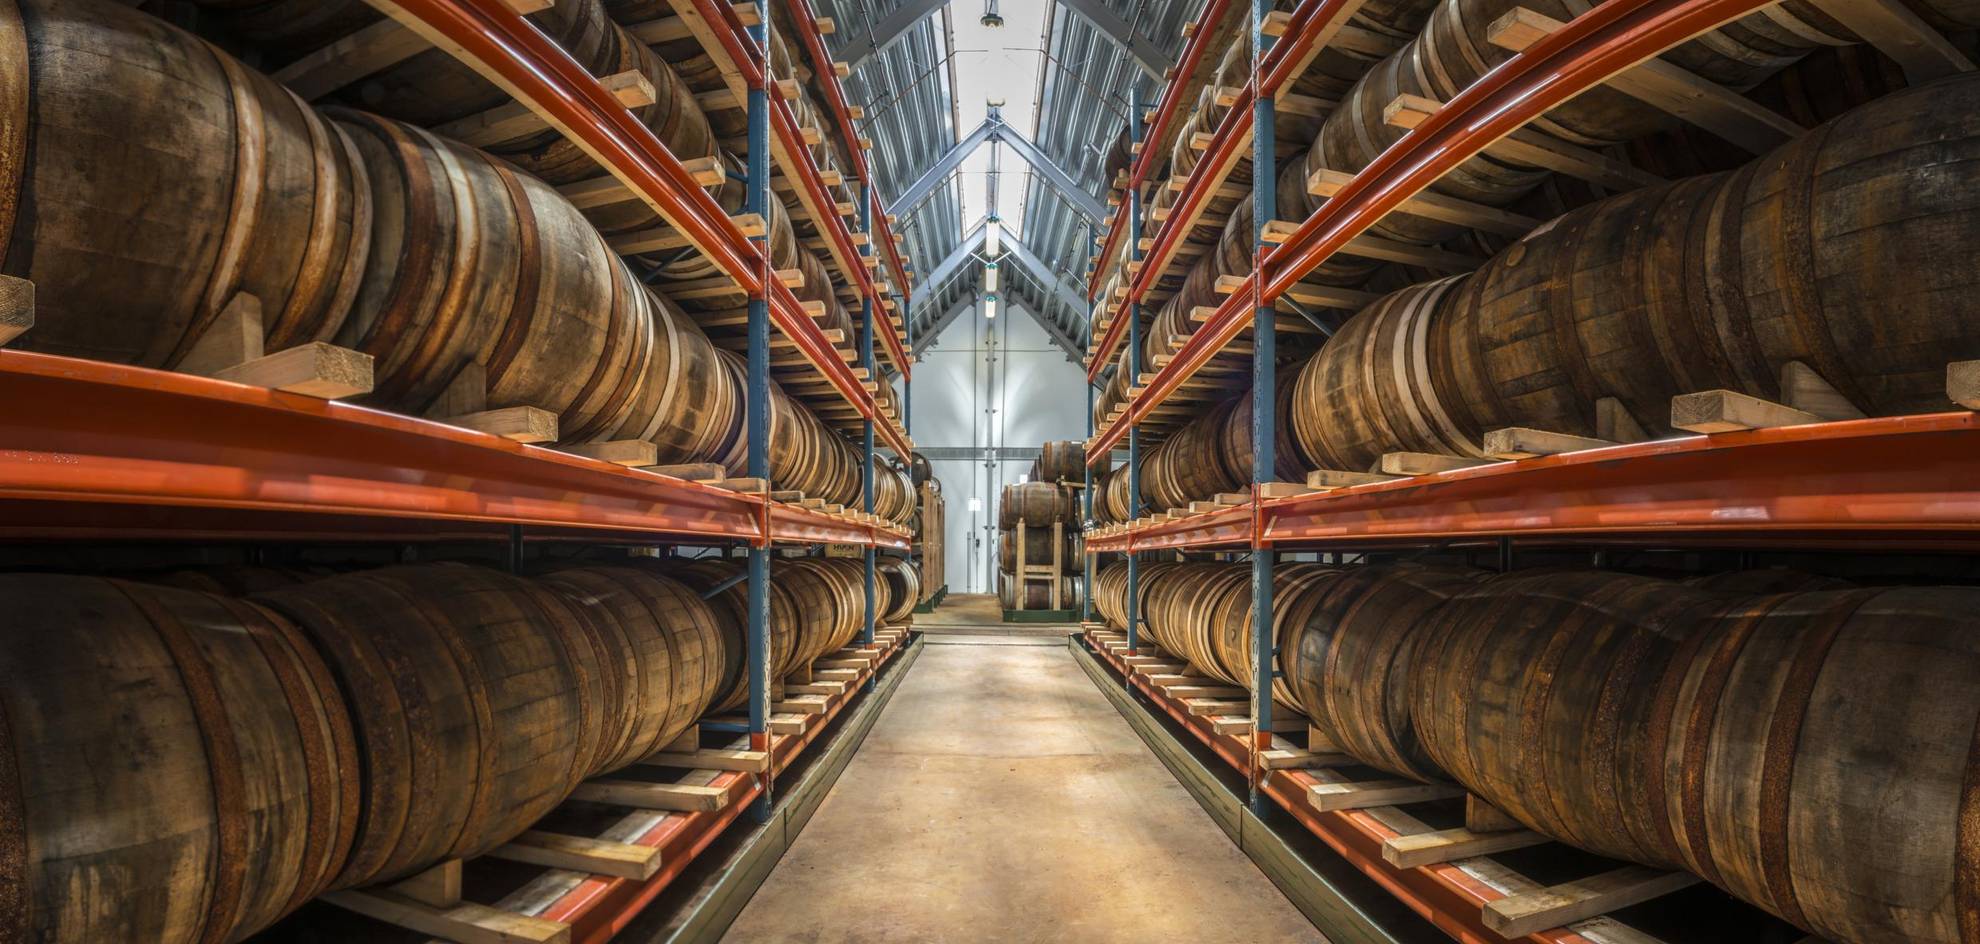 An aisle with barrels of distilled spirits on both sides at the distillery Spirit of Hven.